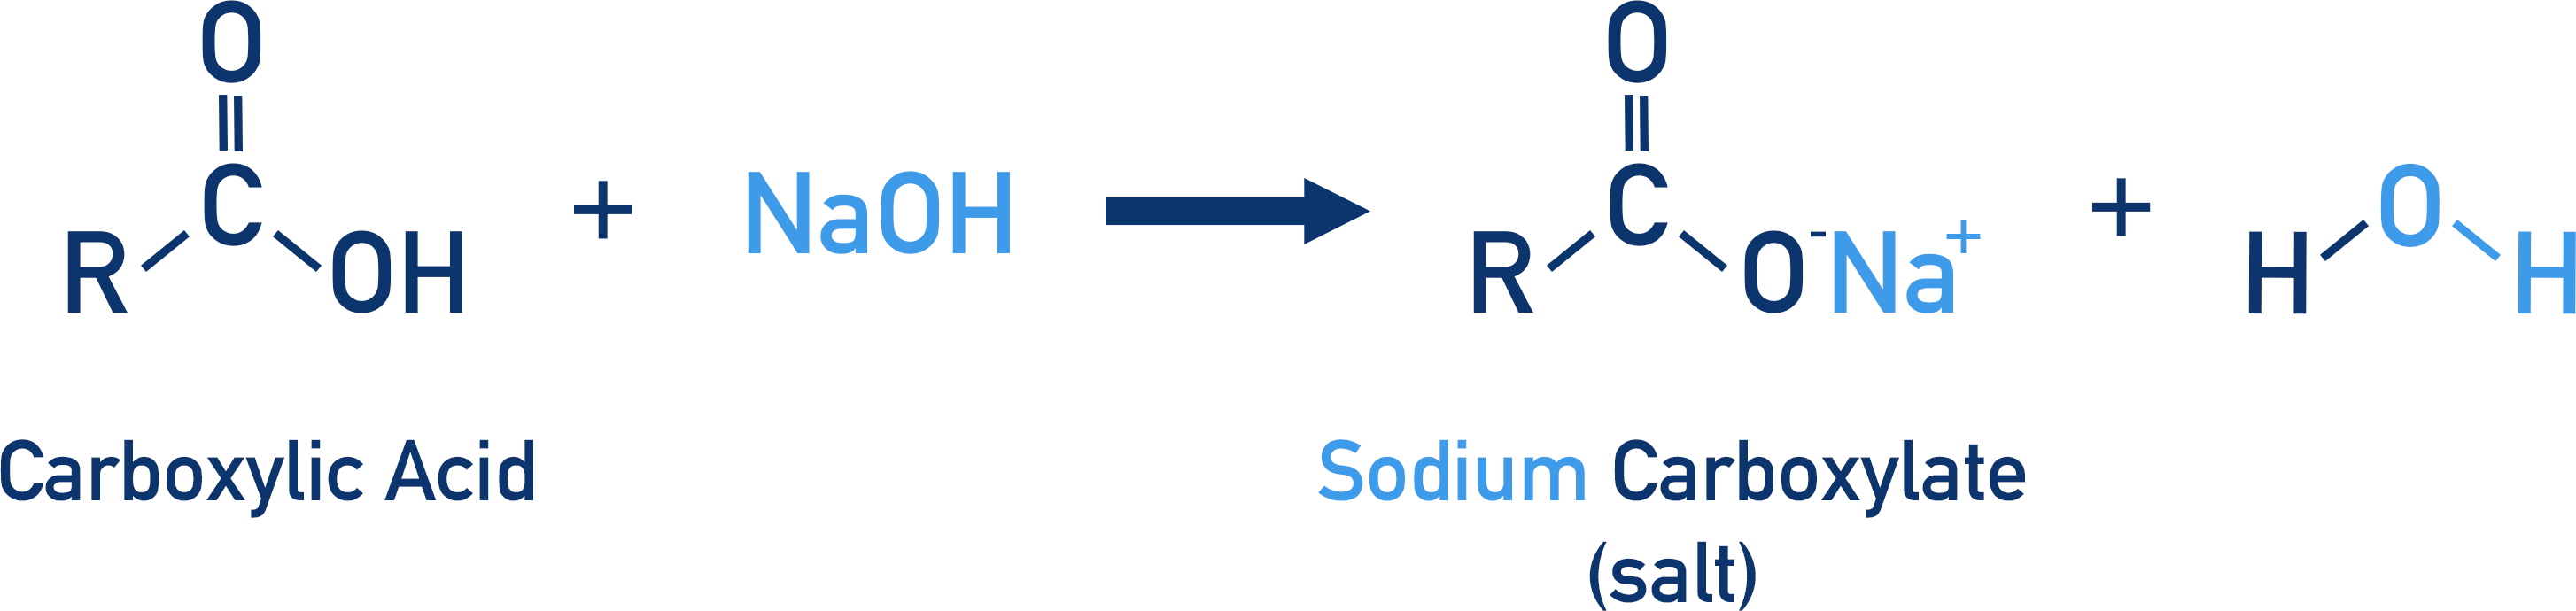 carboxylic acid with sodium hydroxide to form salt sodium carboxylate and water